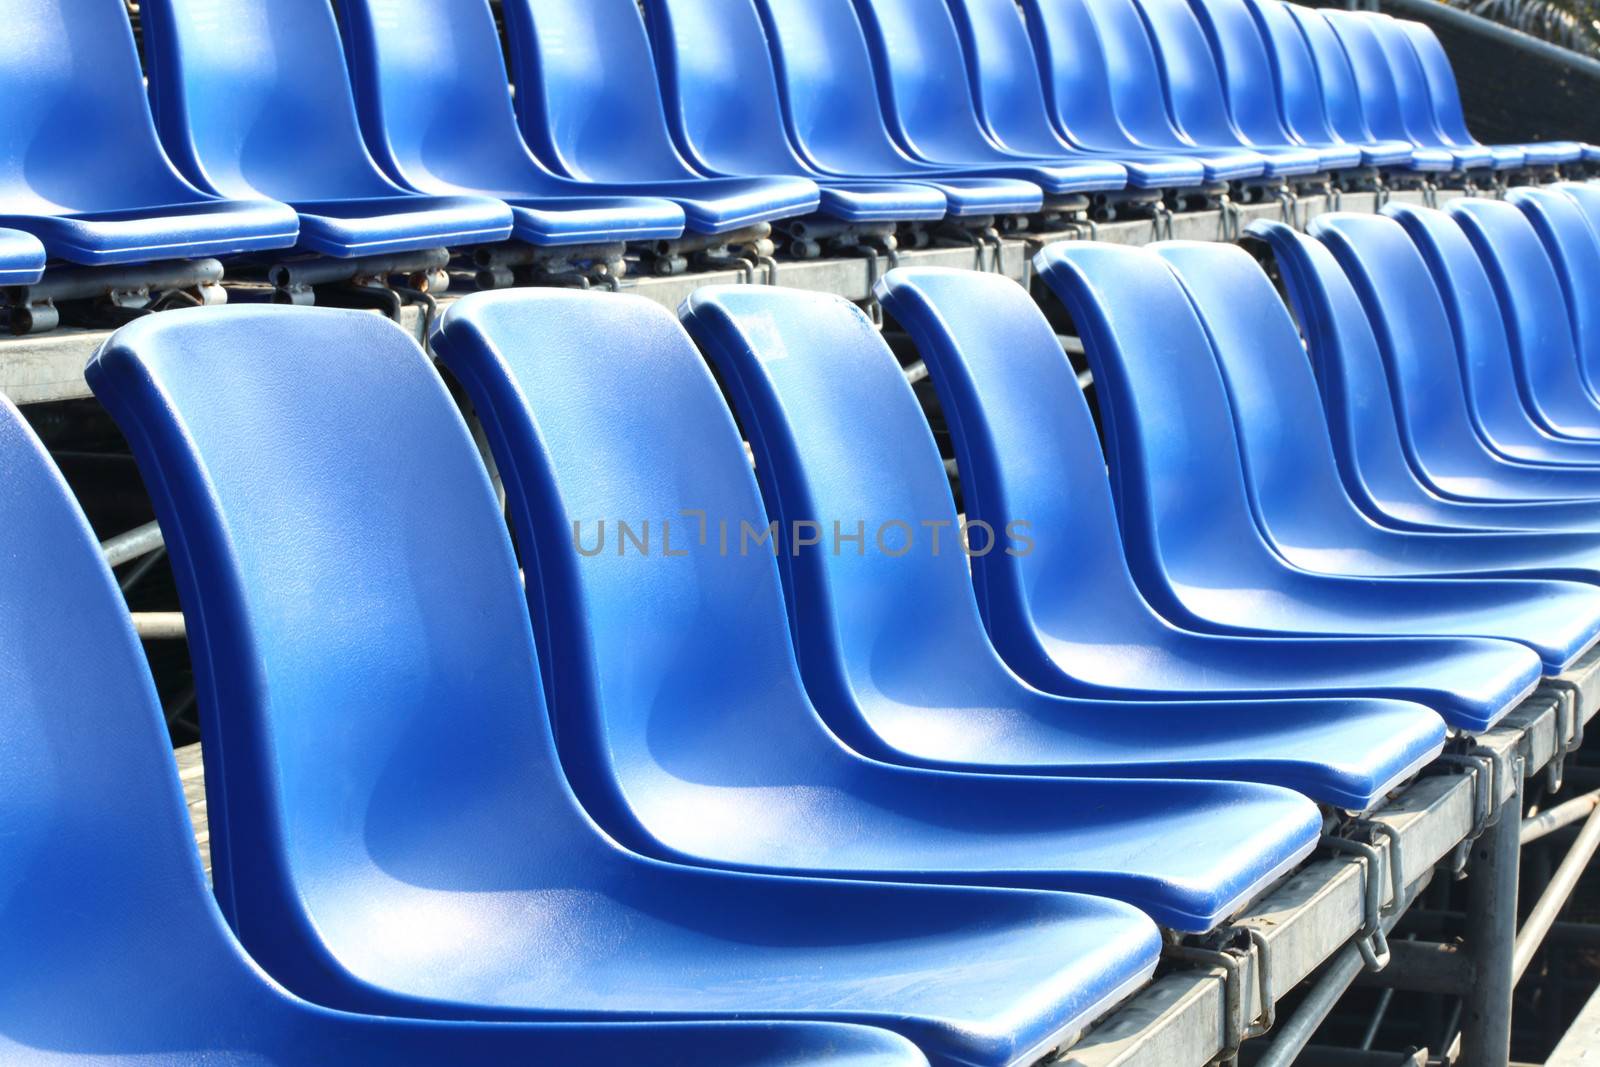 Temporary blue color grand seat